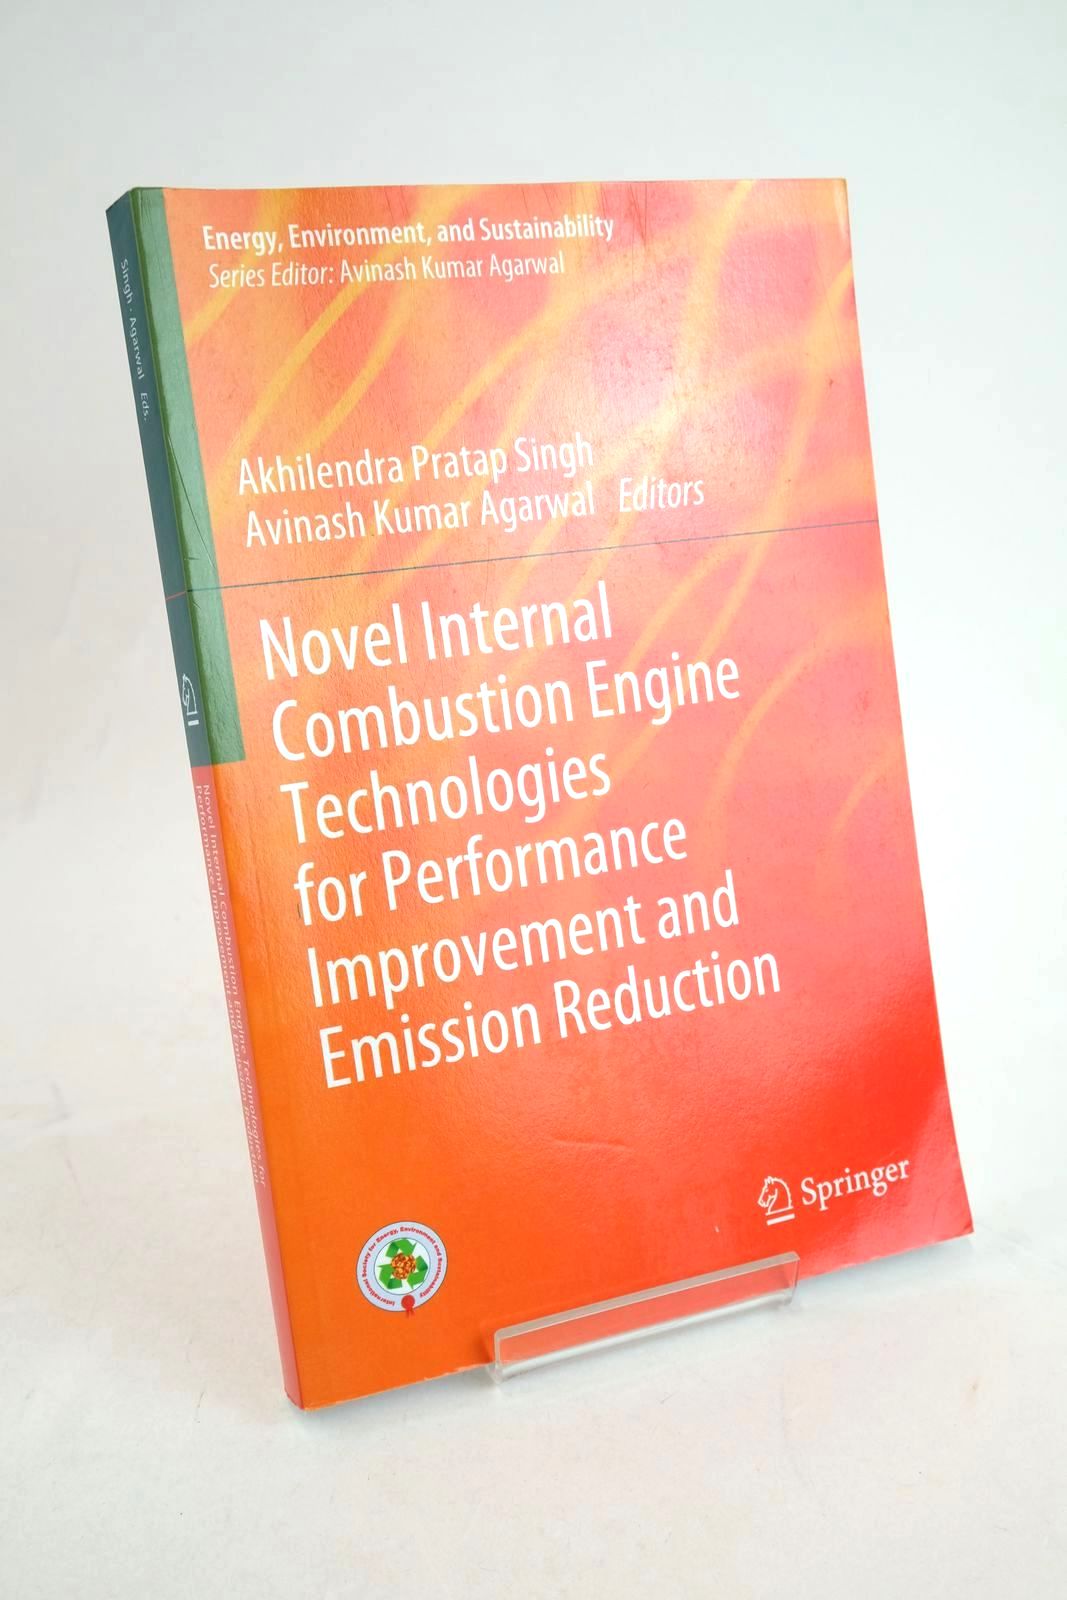 Photo of NOVEL INTERNAL COMBUSTION ENGINE TECHNOLOGIES FOR PERFORMANCE IMPROVEMENT AND EMISSION REDUCTION written by Singh, Arkhilendra Pratap Agarwal, Avinash Kumar published by Springer (STOCK CODE: 1327426)  for sale by Stella & Rose's Books